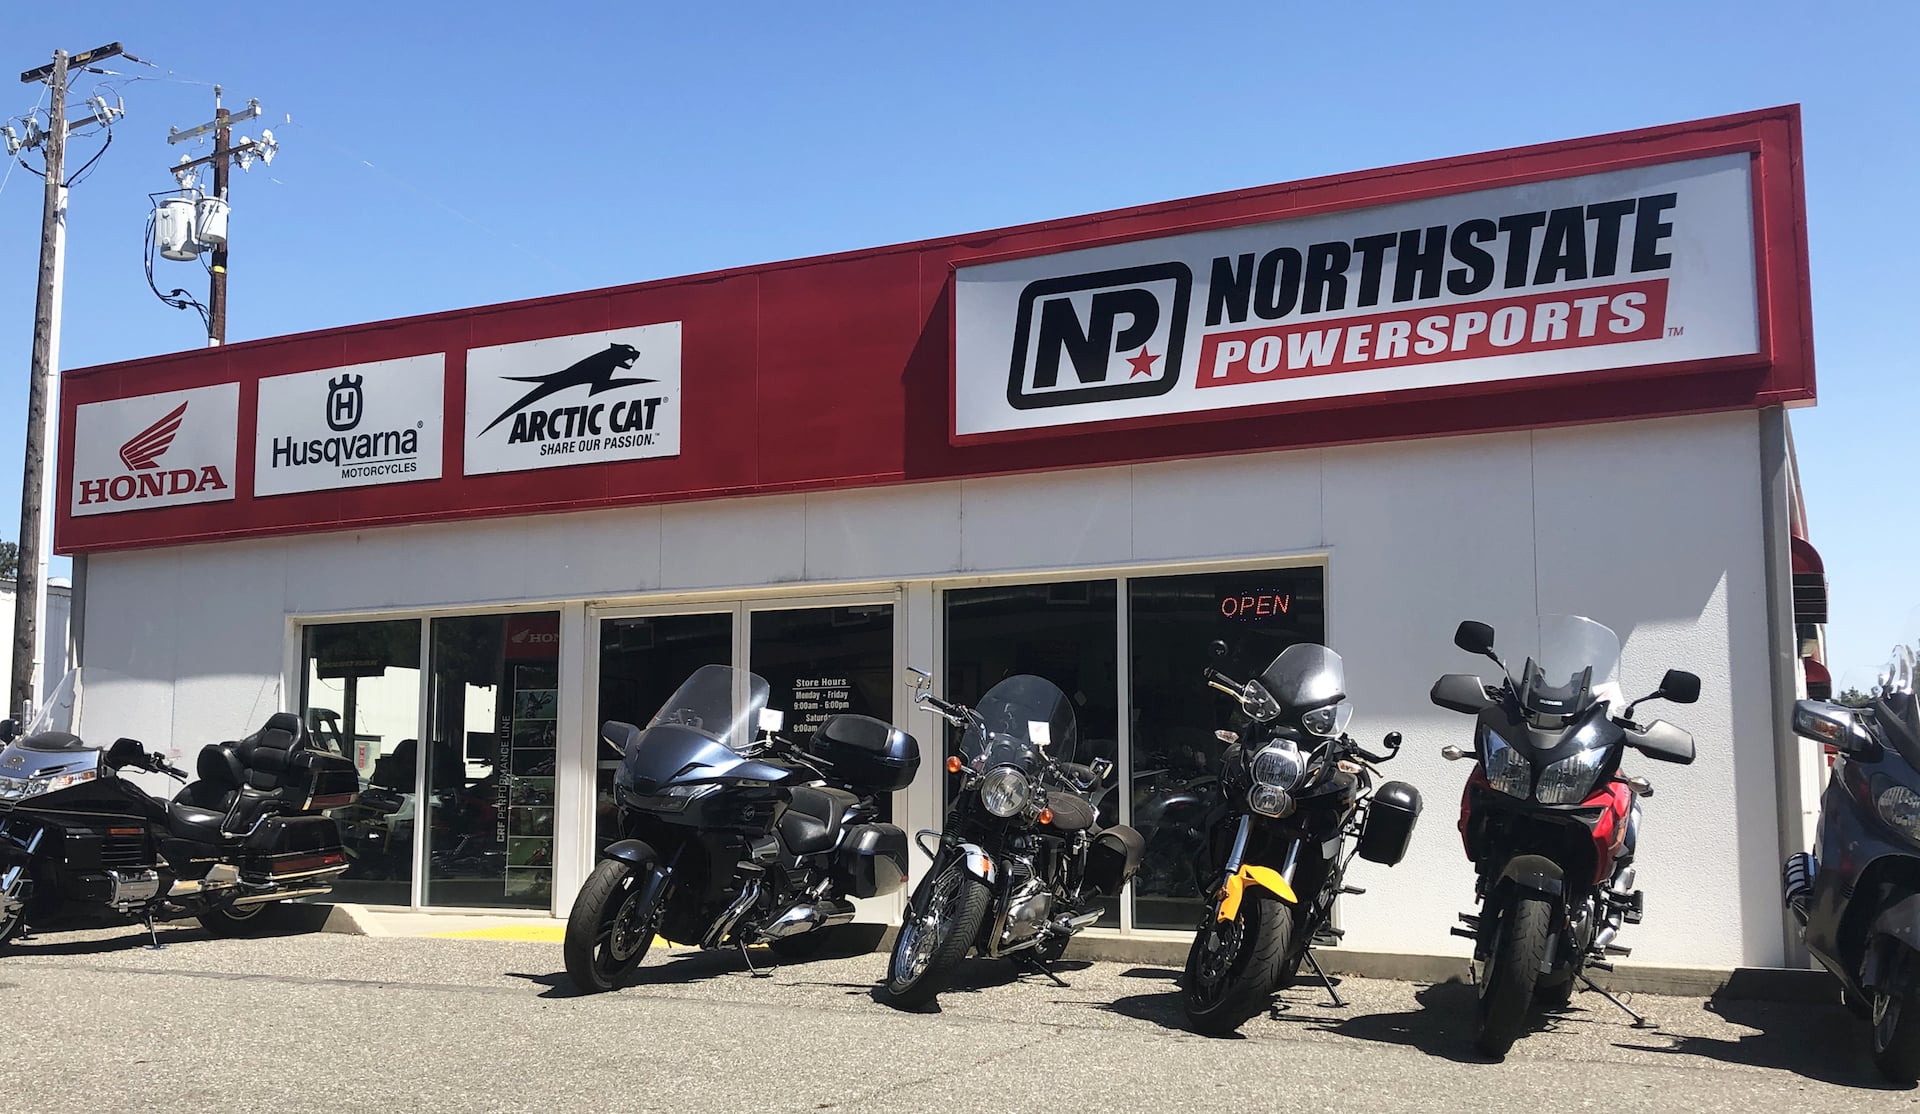 ID International Design & Web: Northstate Powersports client in Chico, CA